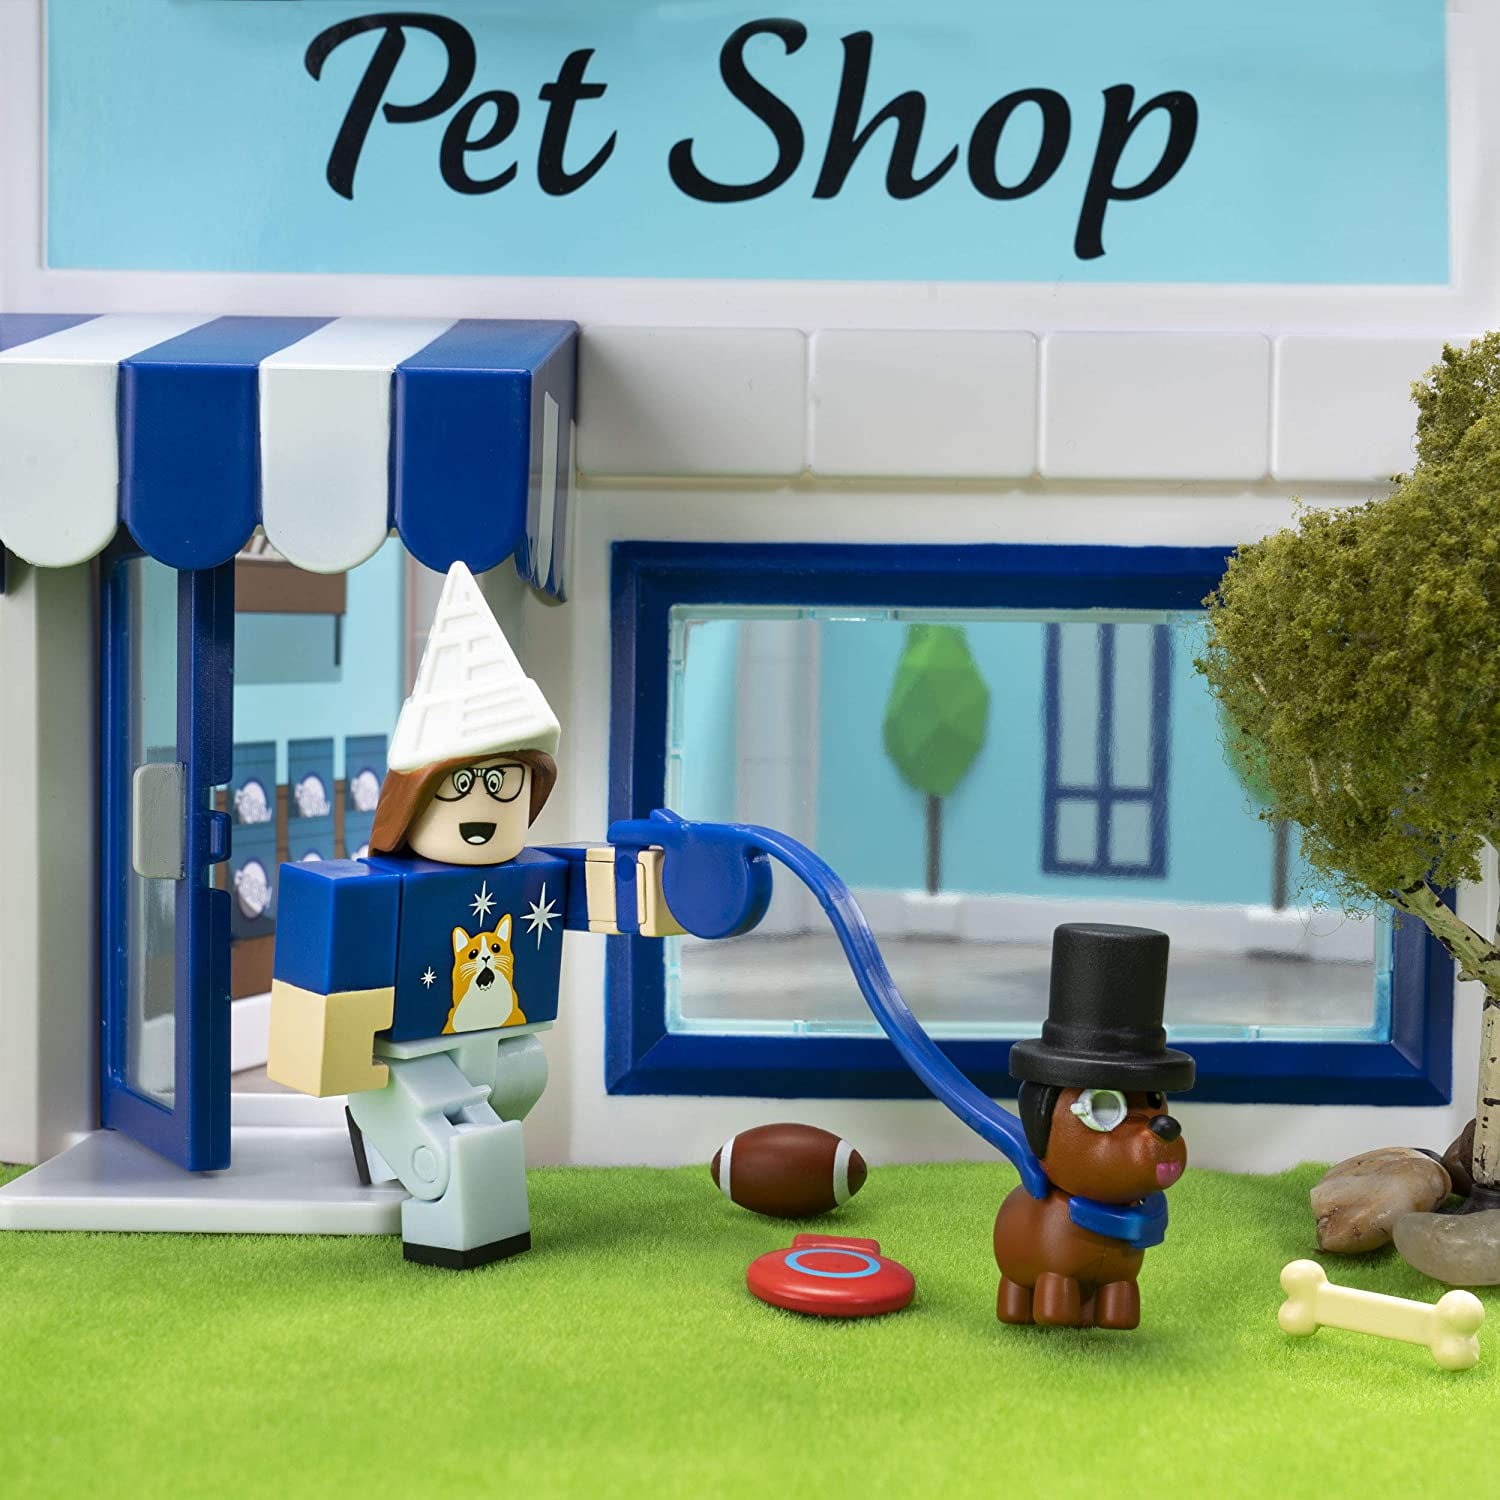 UNLOCKING *EVERY* ADOPT ME PET in ROBLOX FIND THE PET SIM X/ADOPT ME! 